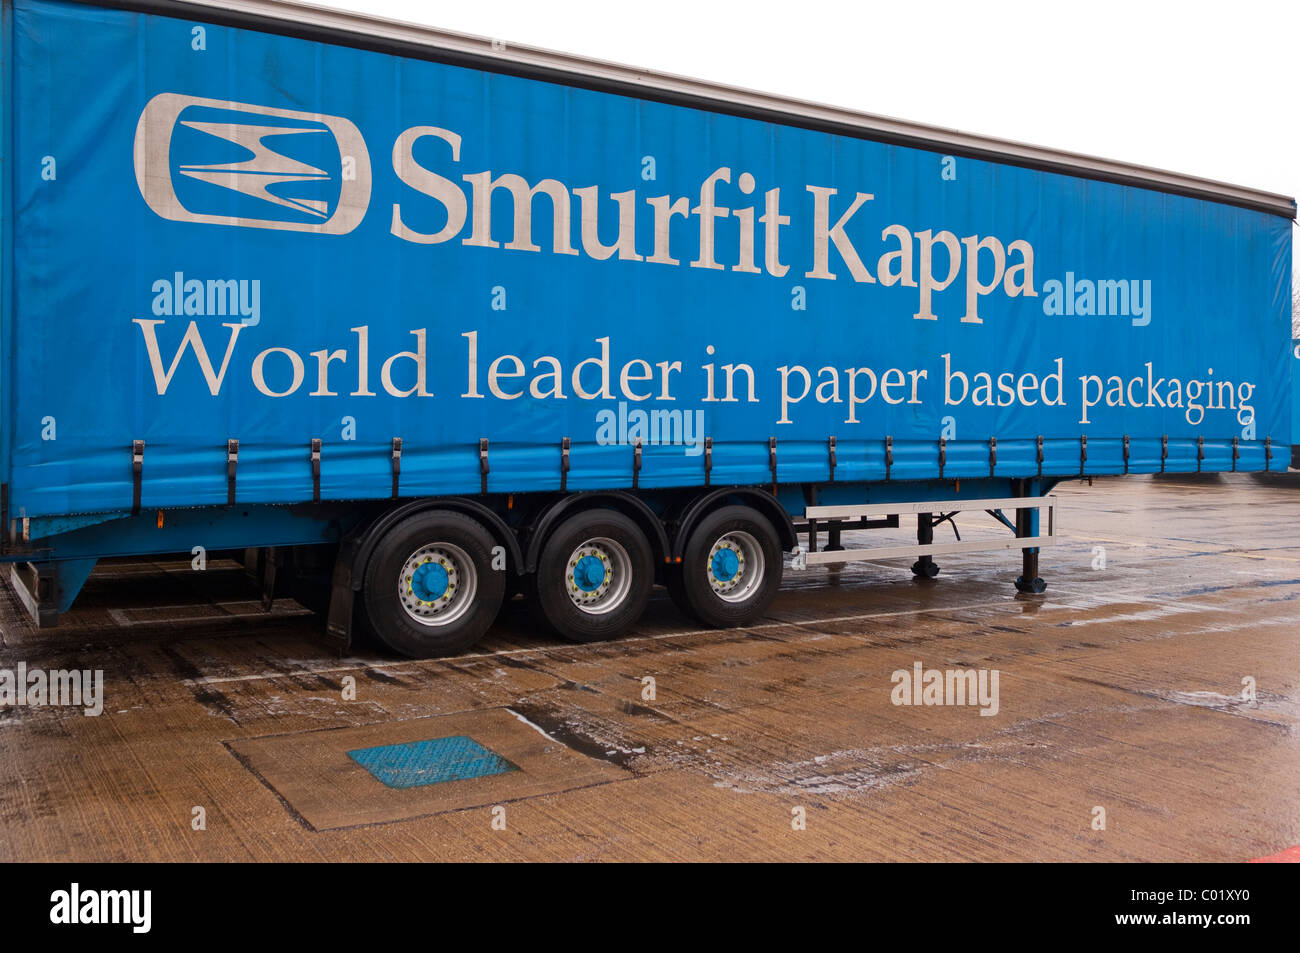 A Smurfit Kappa lorry trailer in the Uk Stock Photo - Alamy